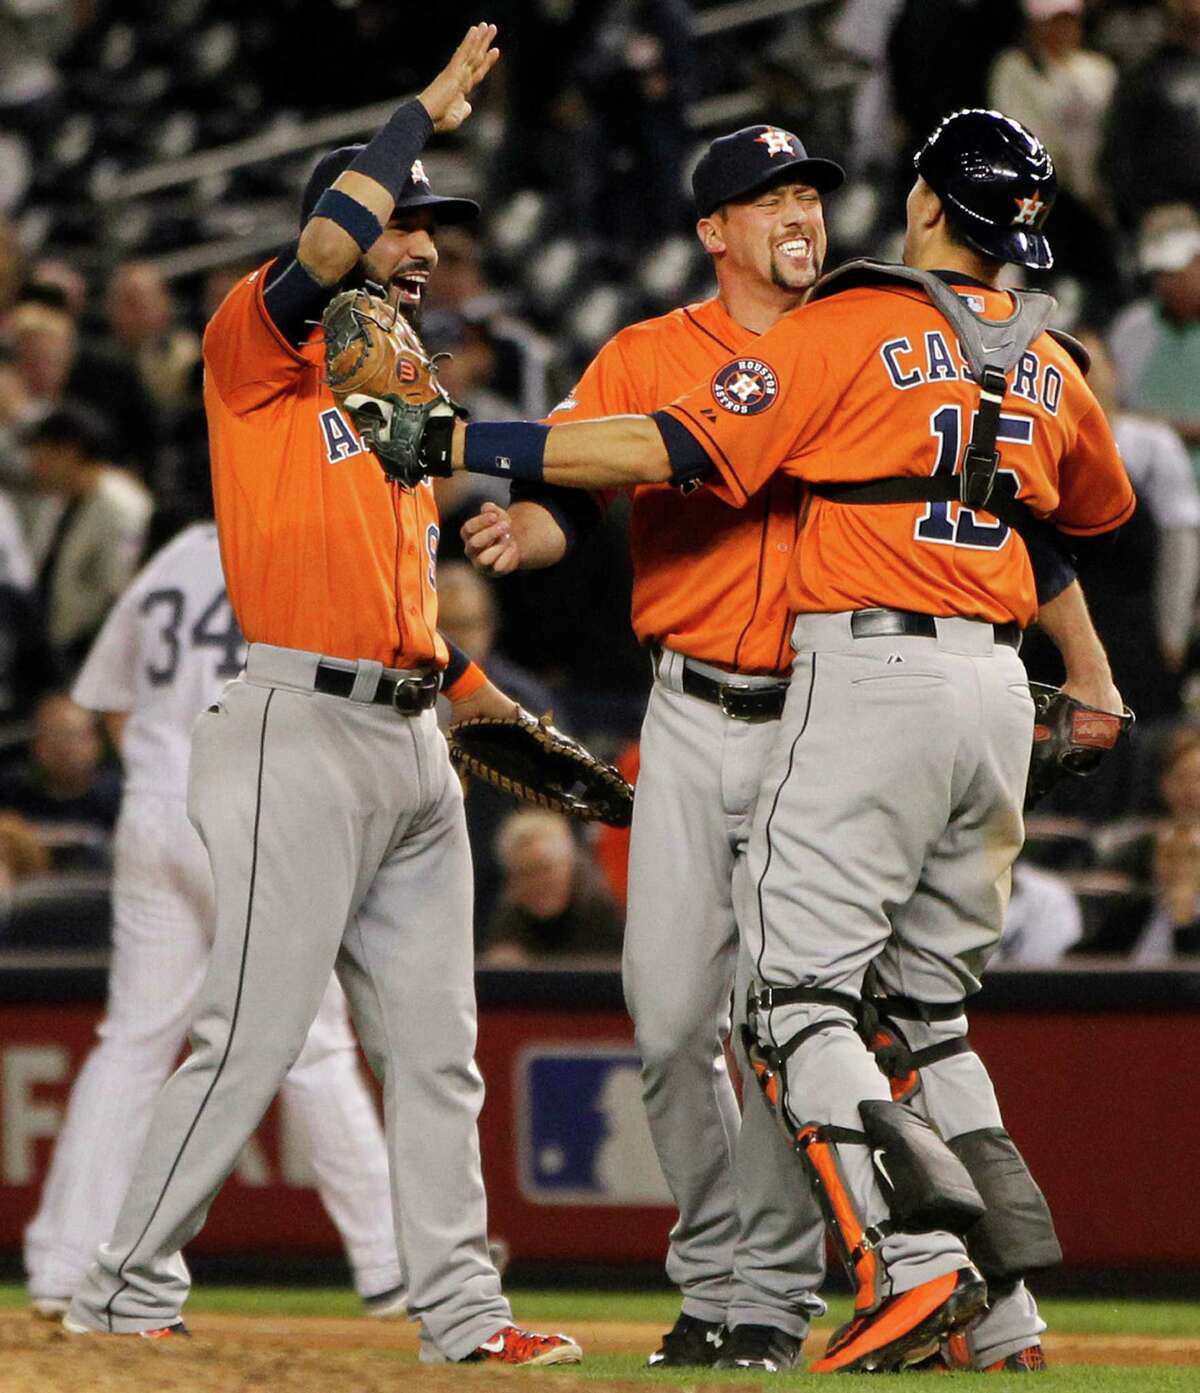 Houston Astros closer Luke Gregerson, center, celebrates the Astros 3-0 win over the New York Yankees with first baseman Marwin Gonzalez and catcher Jason Castro in the American League Wild Card game at Yankee Stadium on Tuesday, Oct. 6, 2015, in New York. ( Karen Warren / Houston Chronicle )